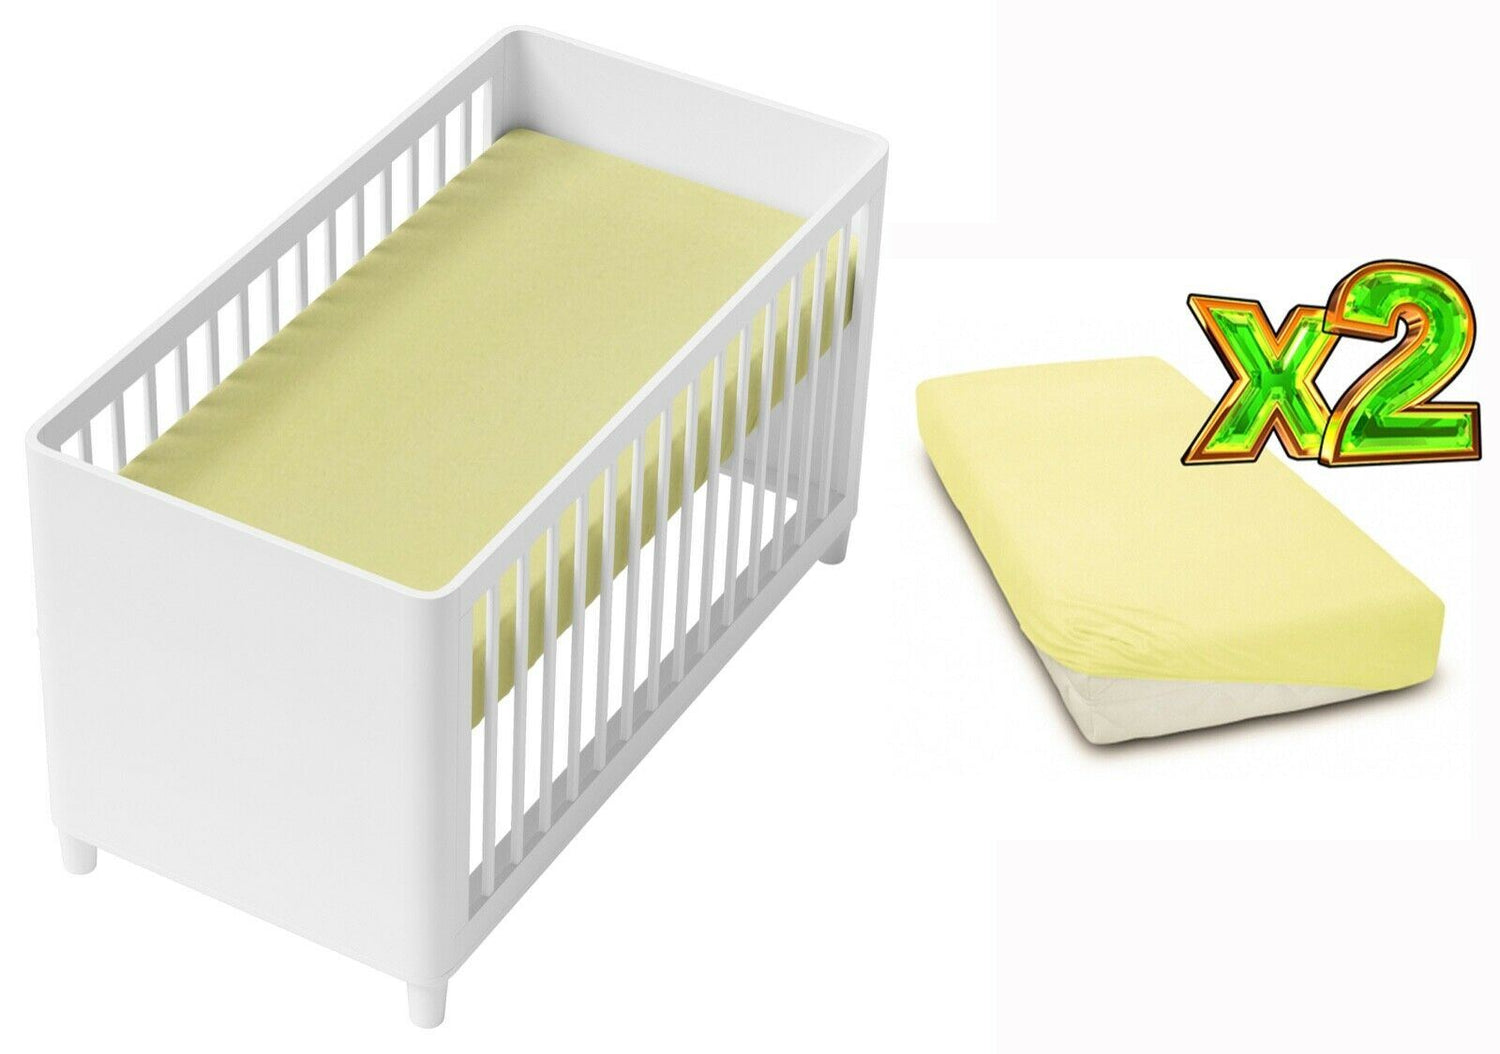 2-pack soft fitted sheet jersey stretchy cotton fit Crib/Cradle 90x40 Yellow